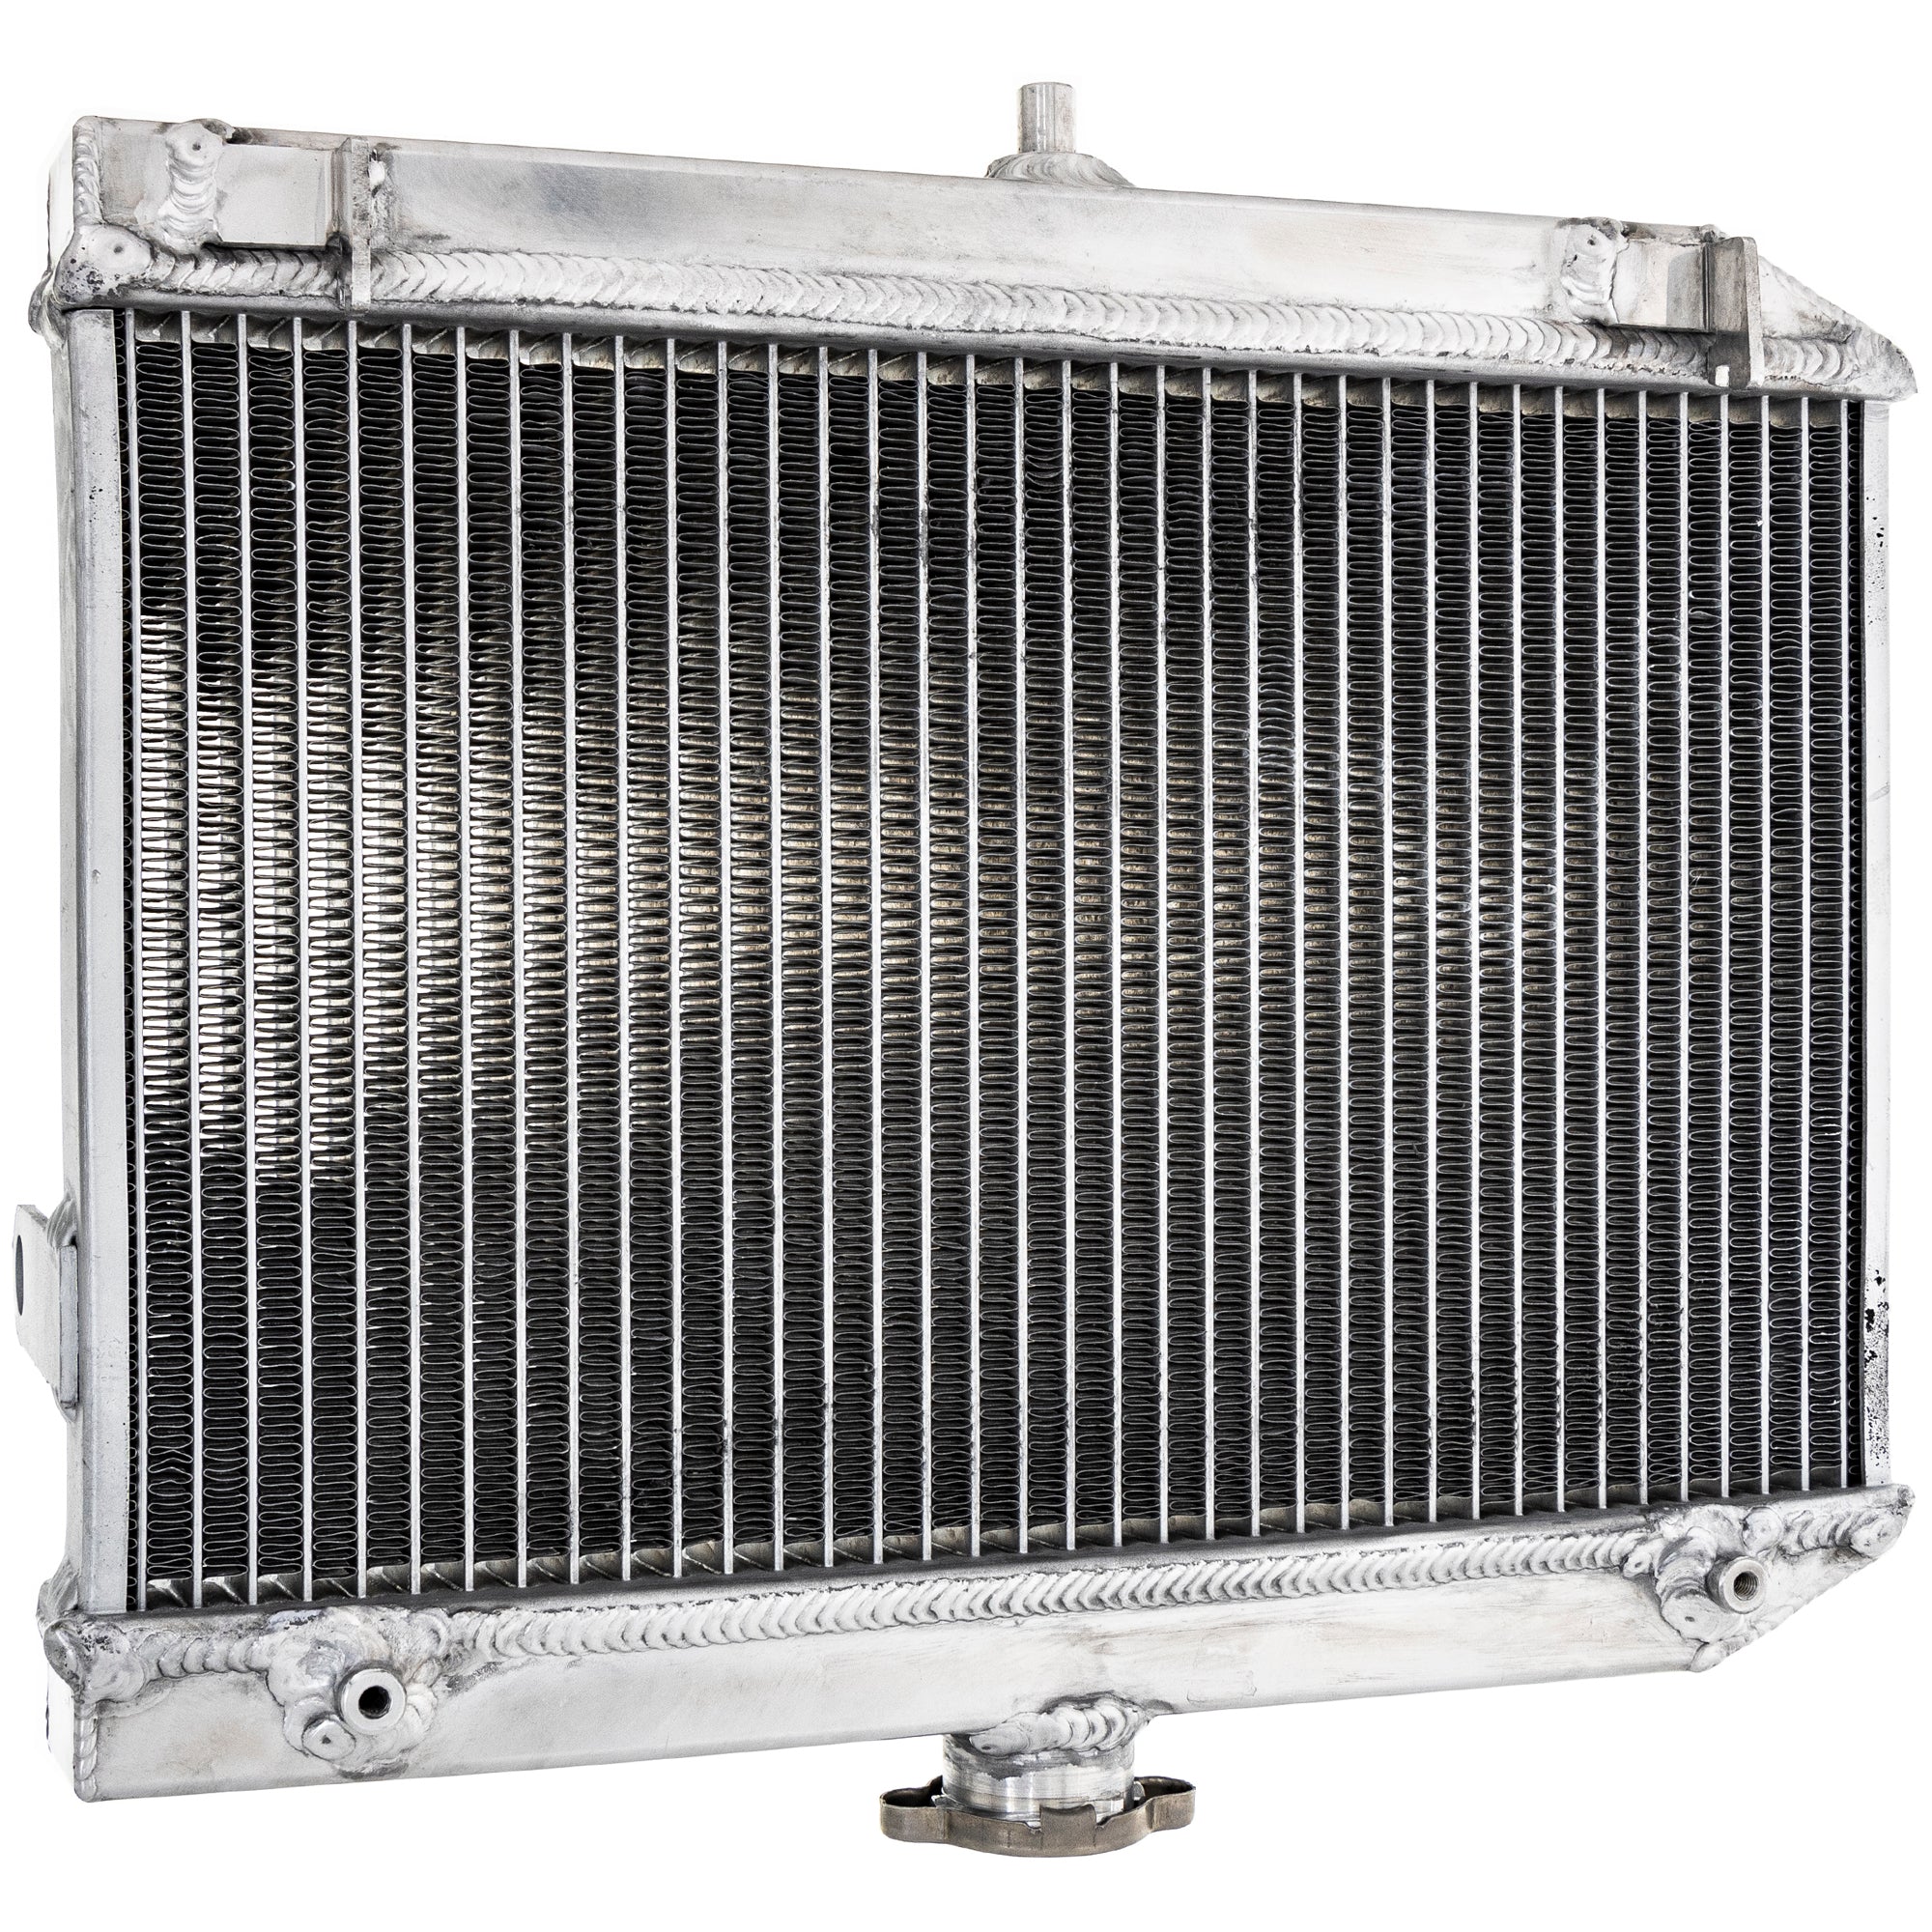 NICHE 519-CRD2231A High Capacity Radiator for zOTHER